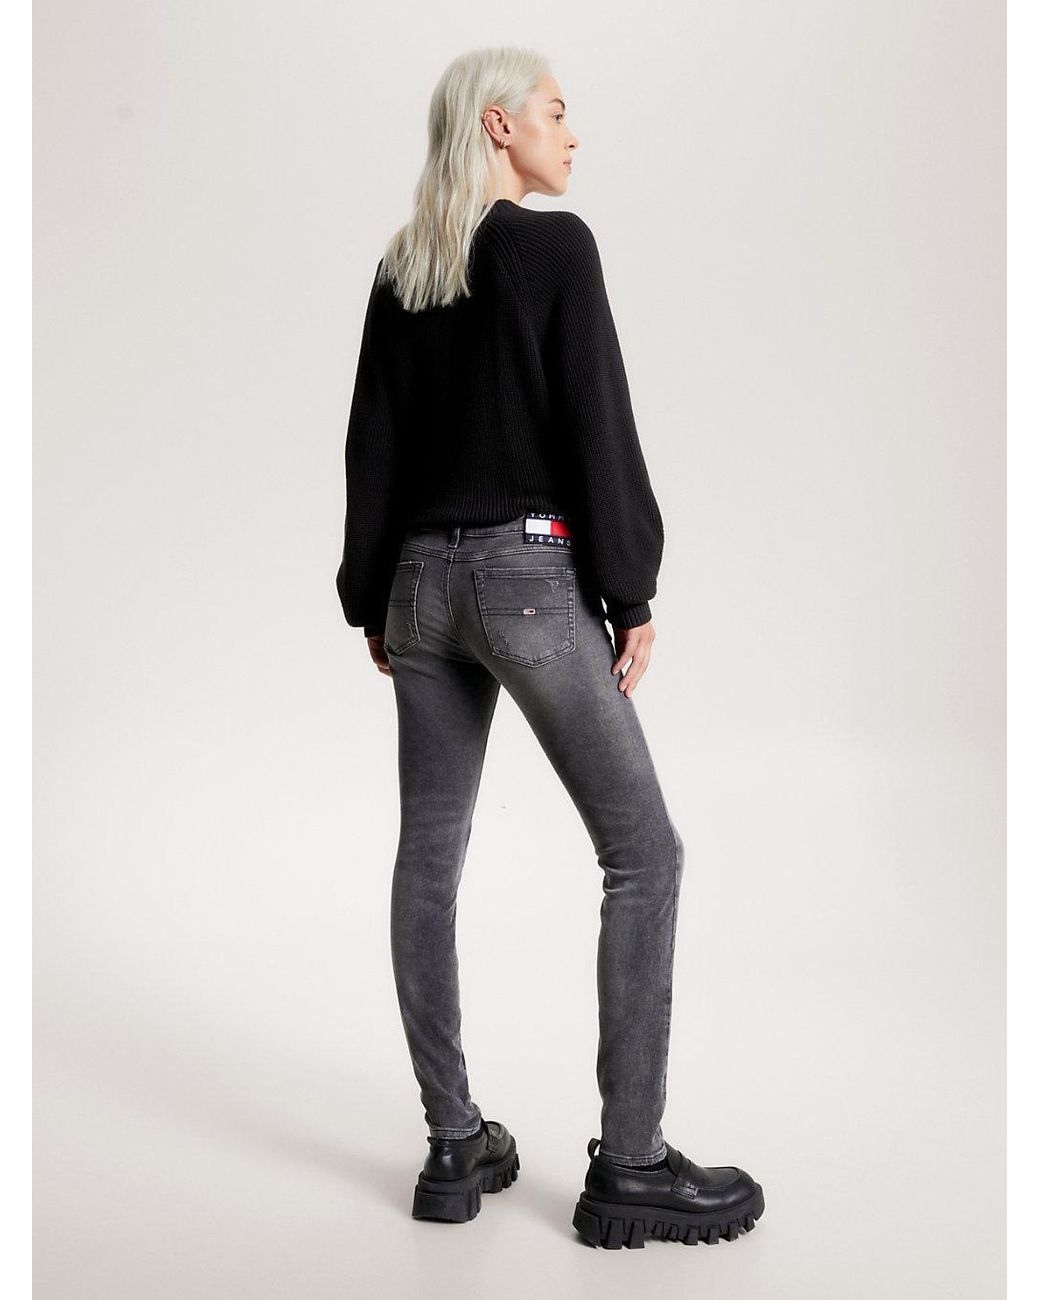 Tommy Hilfiger Sophie Low Rise Skinny Distressed Jeans in Black | Lyst UK